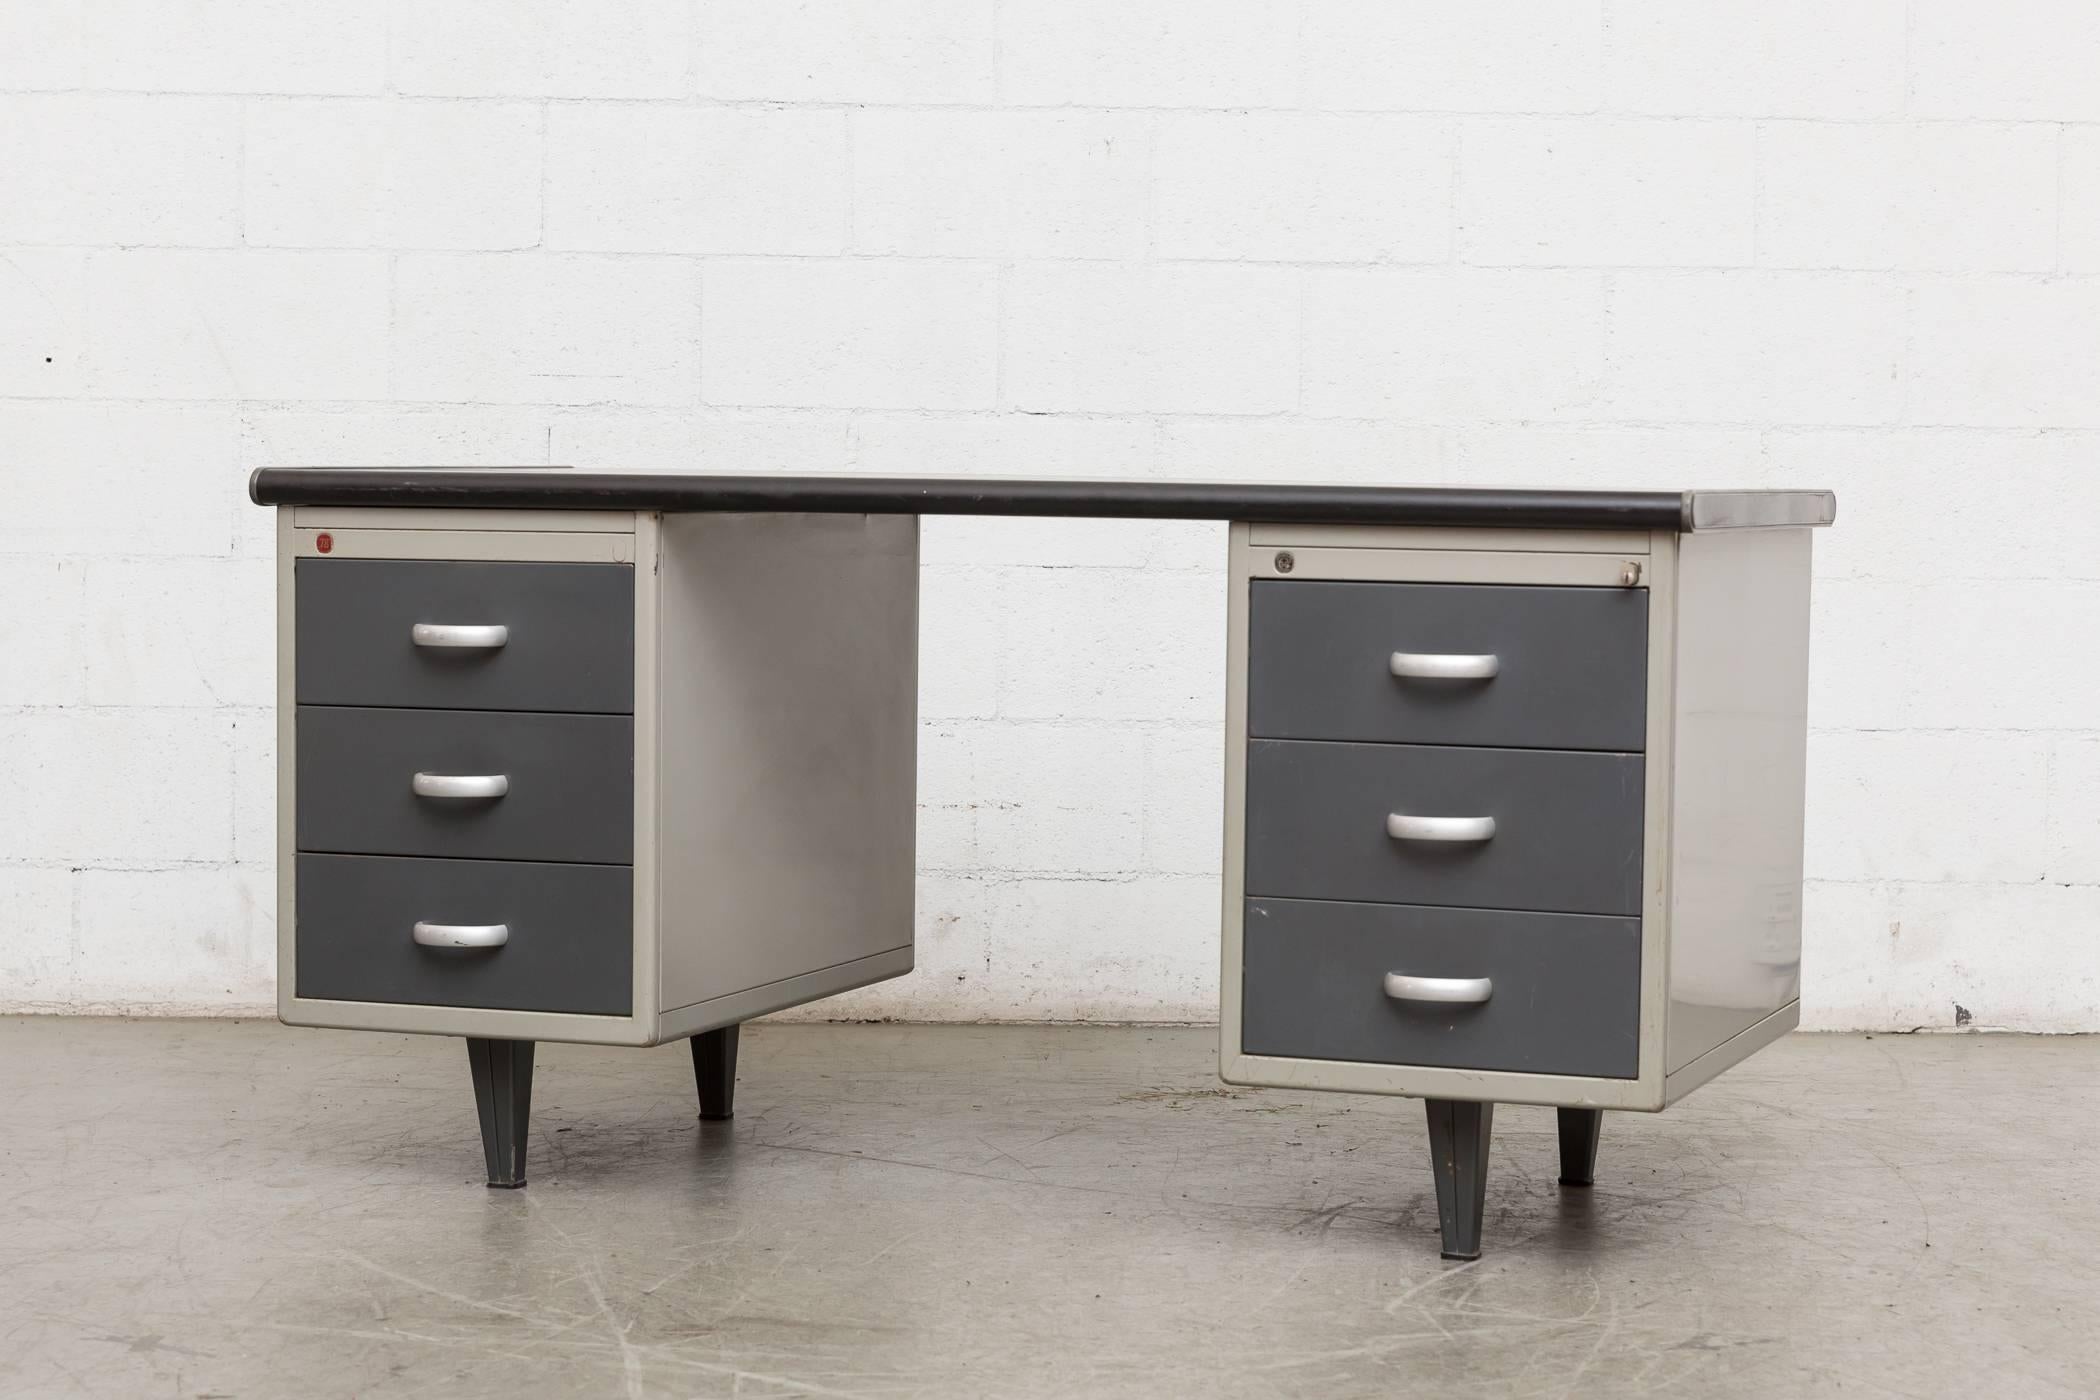 Very cool midcentury Gispen Industrial metal desk with linoleum top, light grey enameled metal frame and dark blue-grey-ish double stacking drawers. Original owners stickers still inside the drawer. Manufacturers logo on top left side (as pictured).